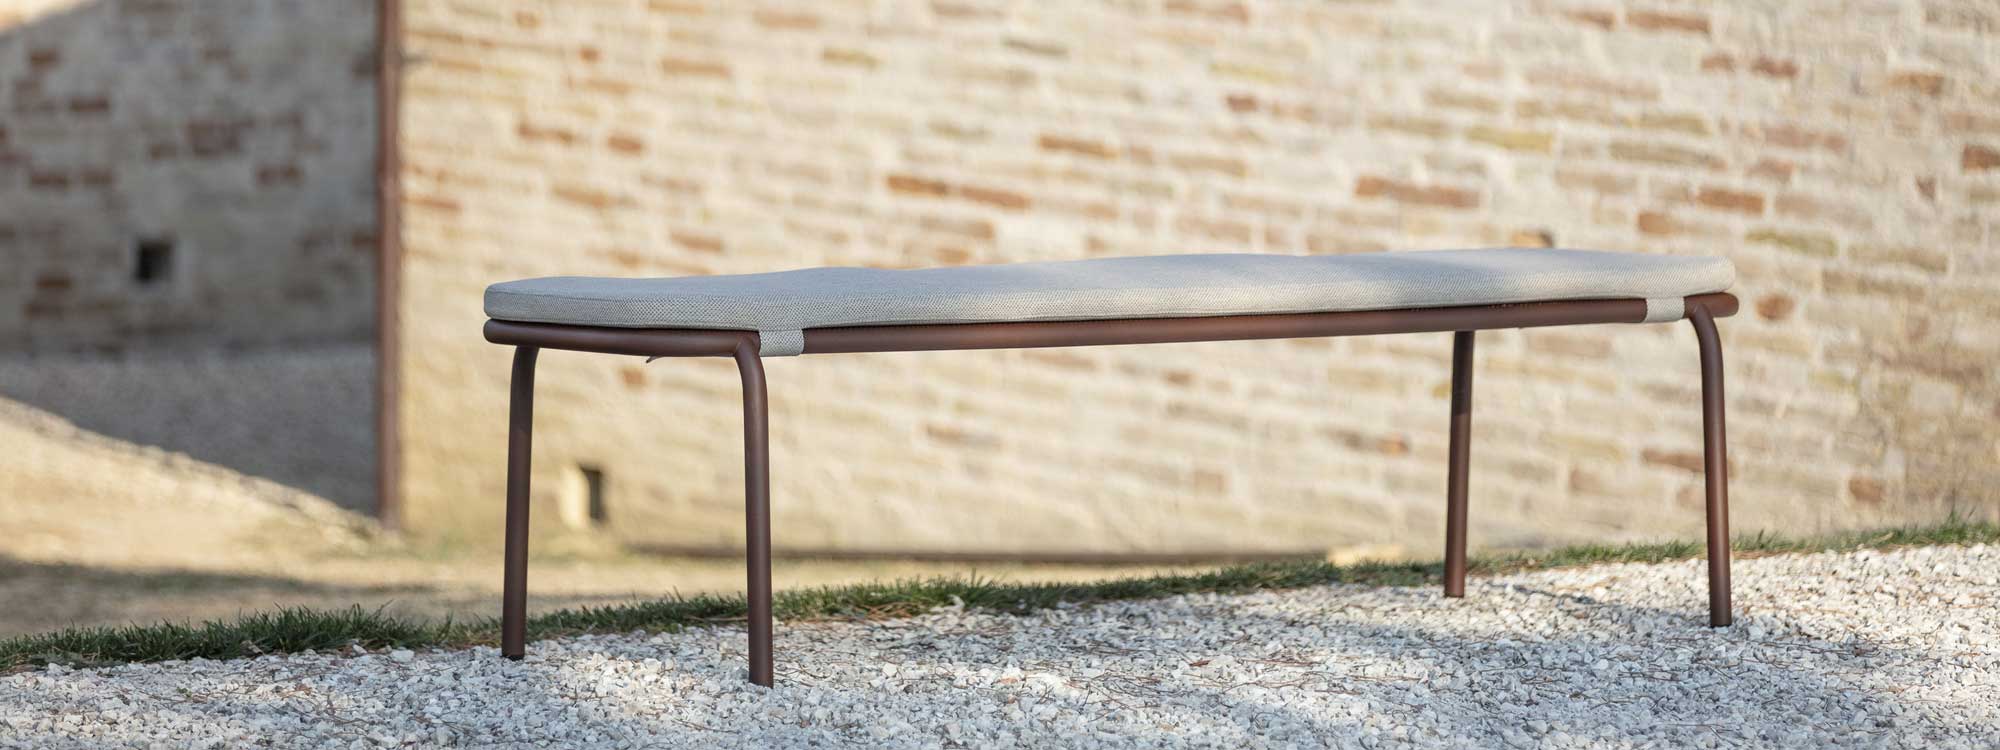 Image of Todus modern garden bench seat in tubular and mesh stainless steel, designed by Studio Segers